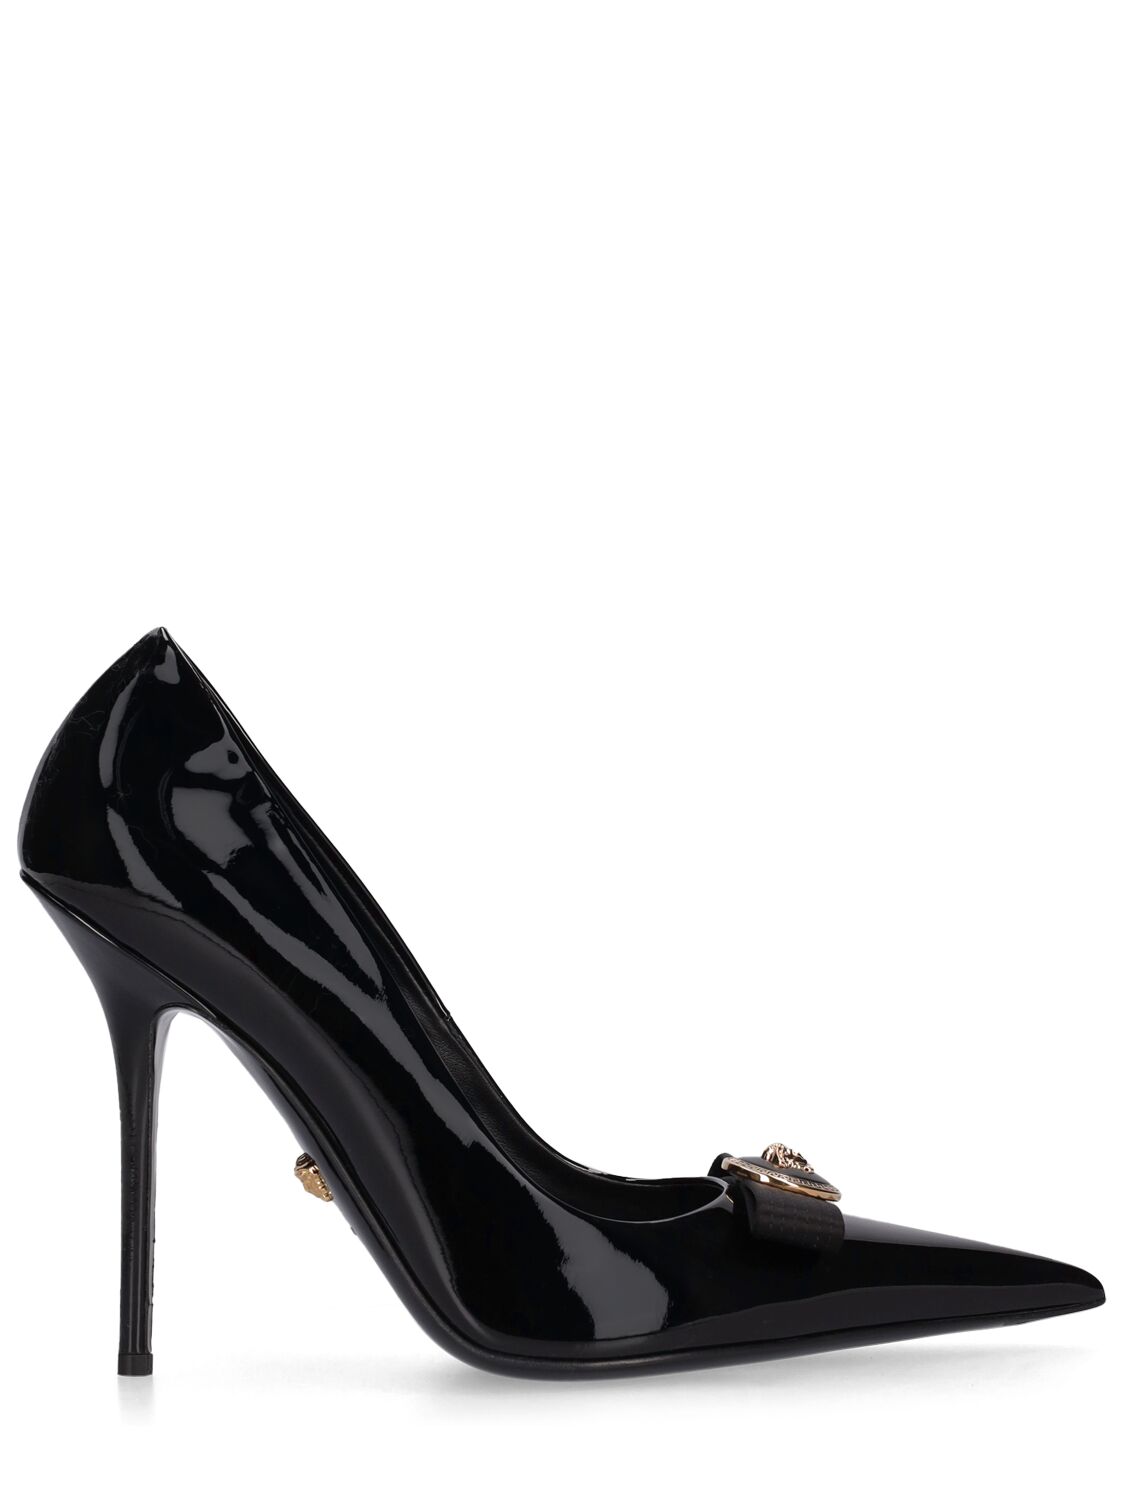 110mm Patent Leather Pumps